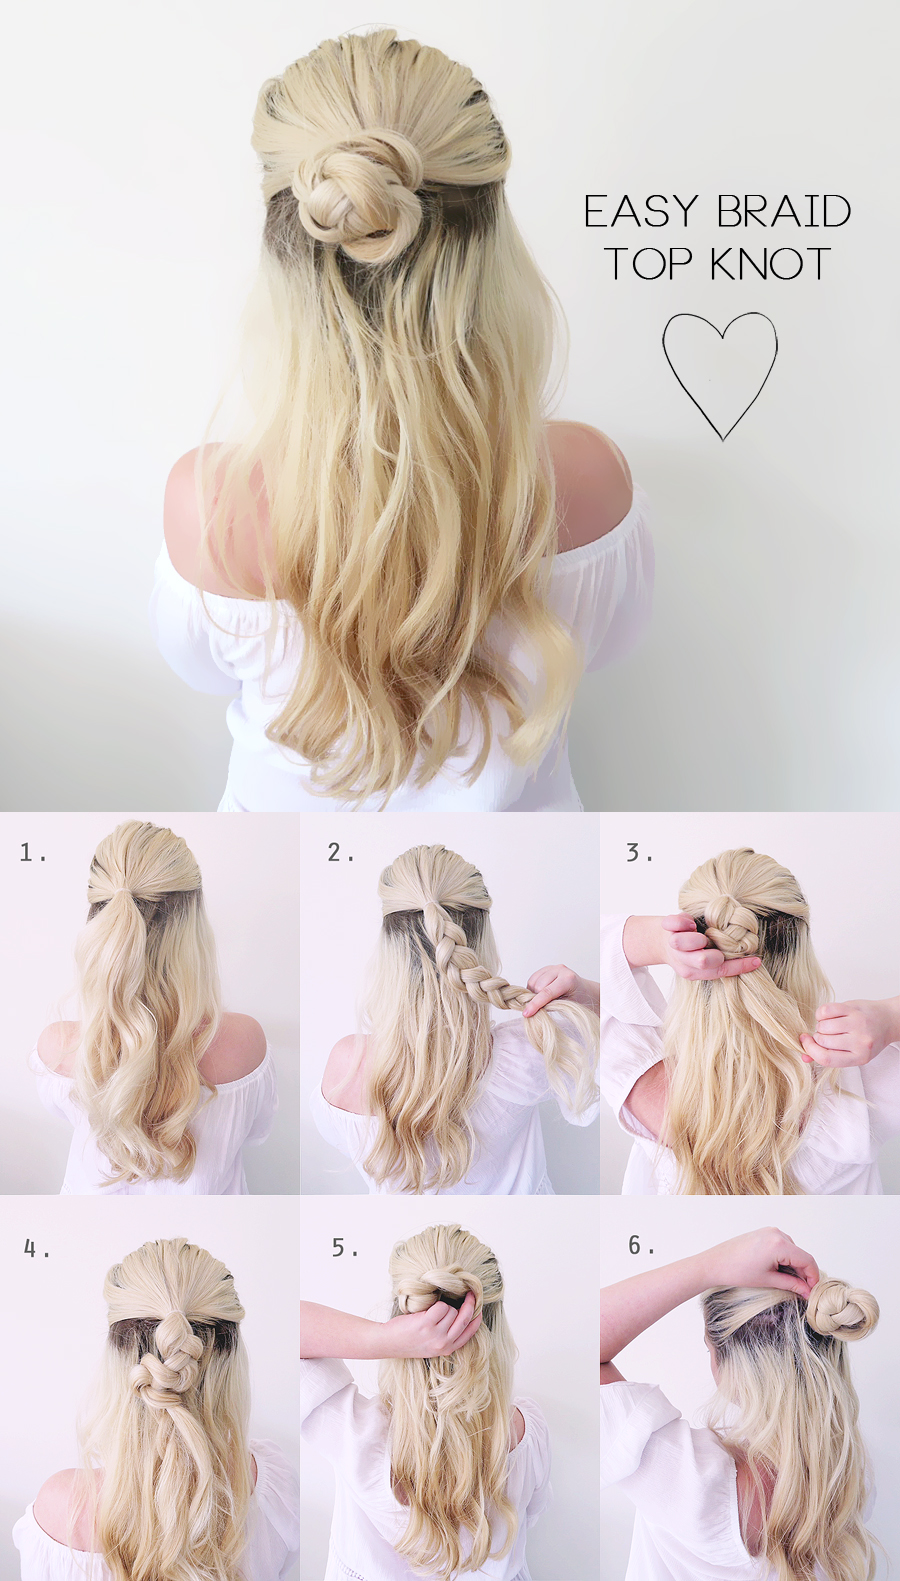 Celtic Knot Tutorial - Hairstyle by Abby of Twist Me Pretty